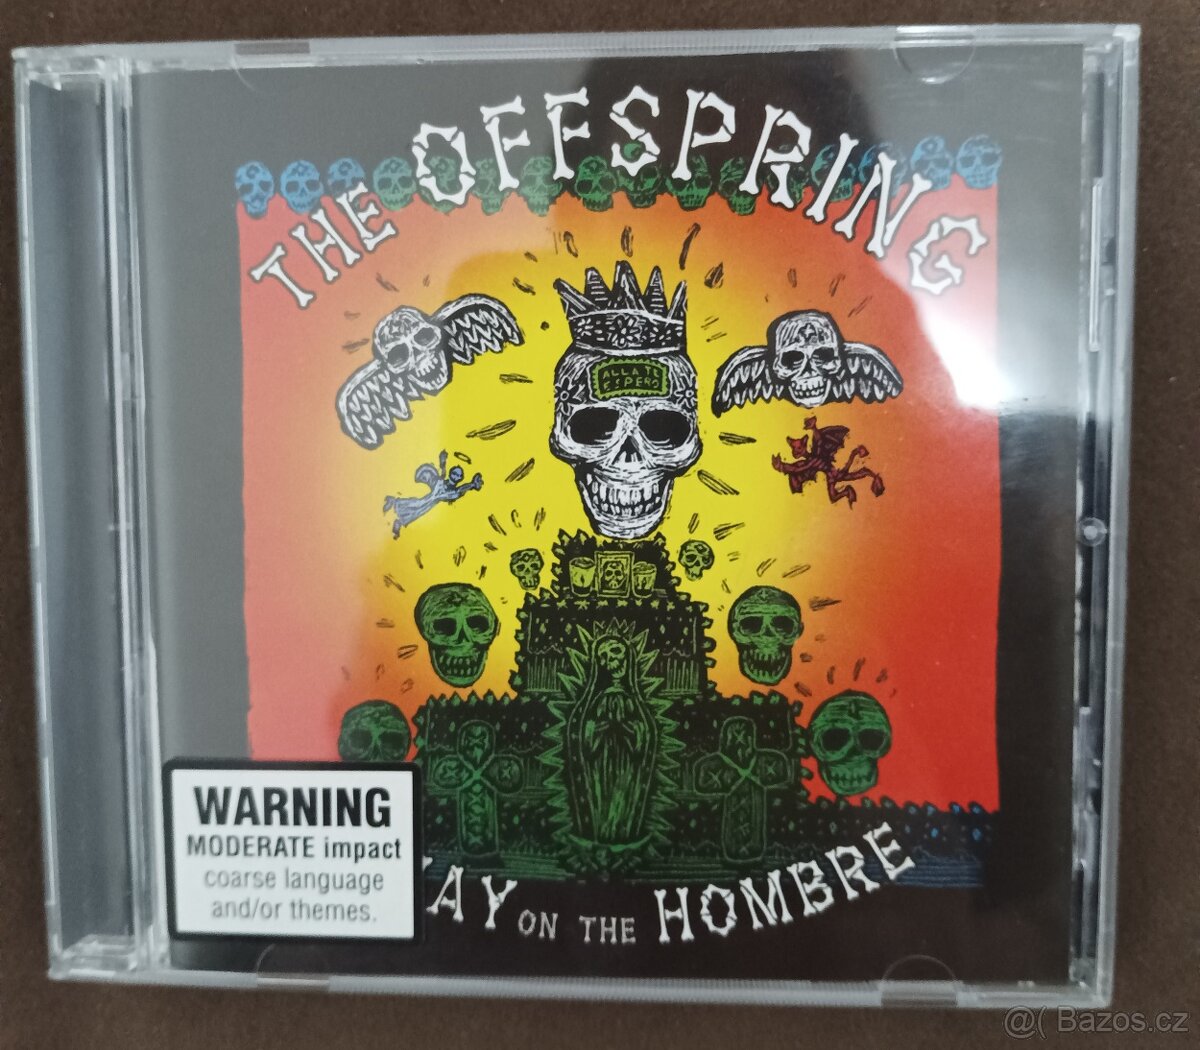 Offspring - Ixnay on the hombre cd